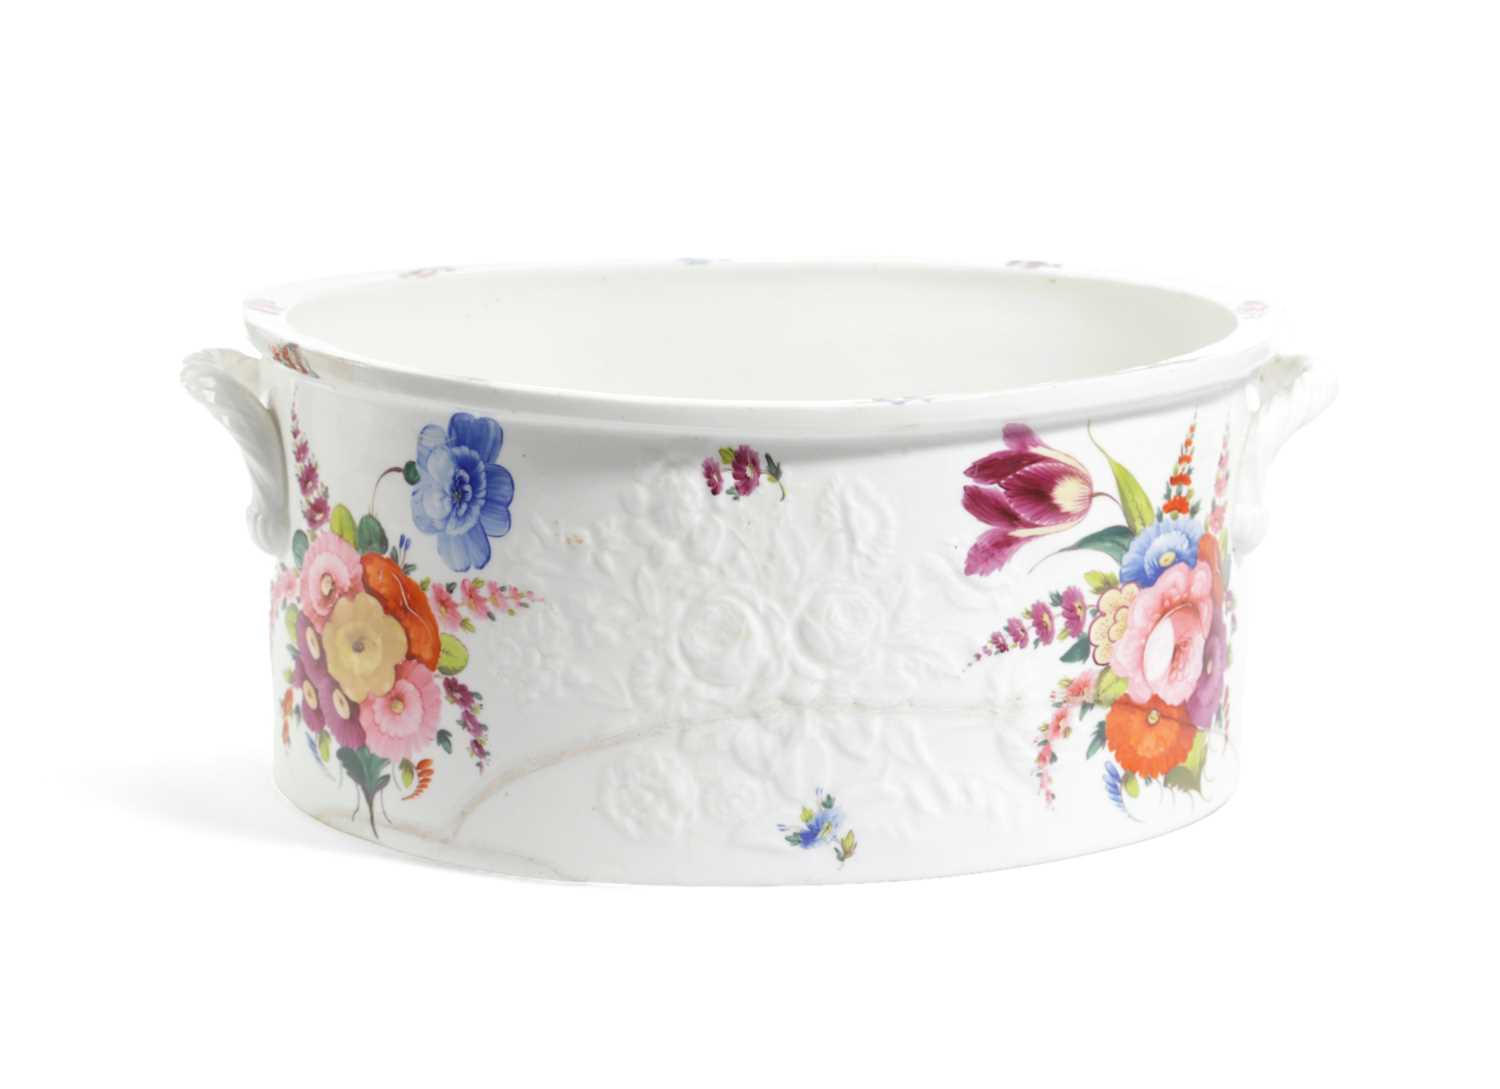 AN ENGLISH PORCELAIN FOOTBATH 19TH CENTURY of oval form, moulded with flowers and painted with